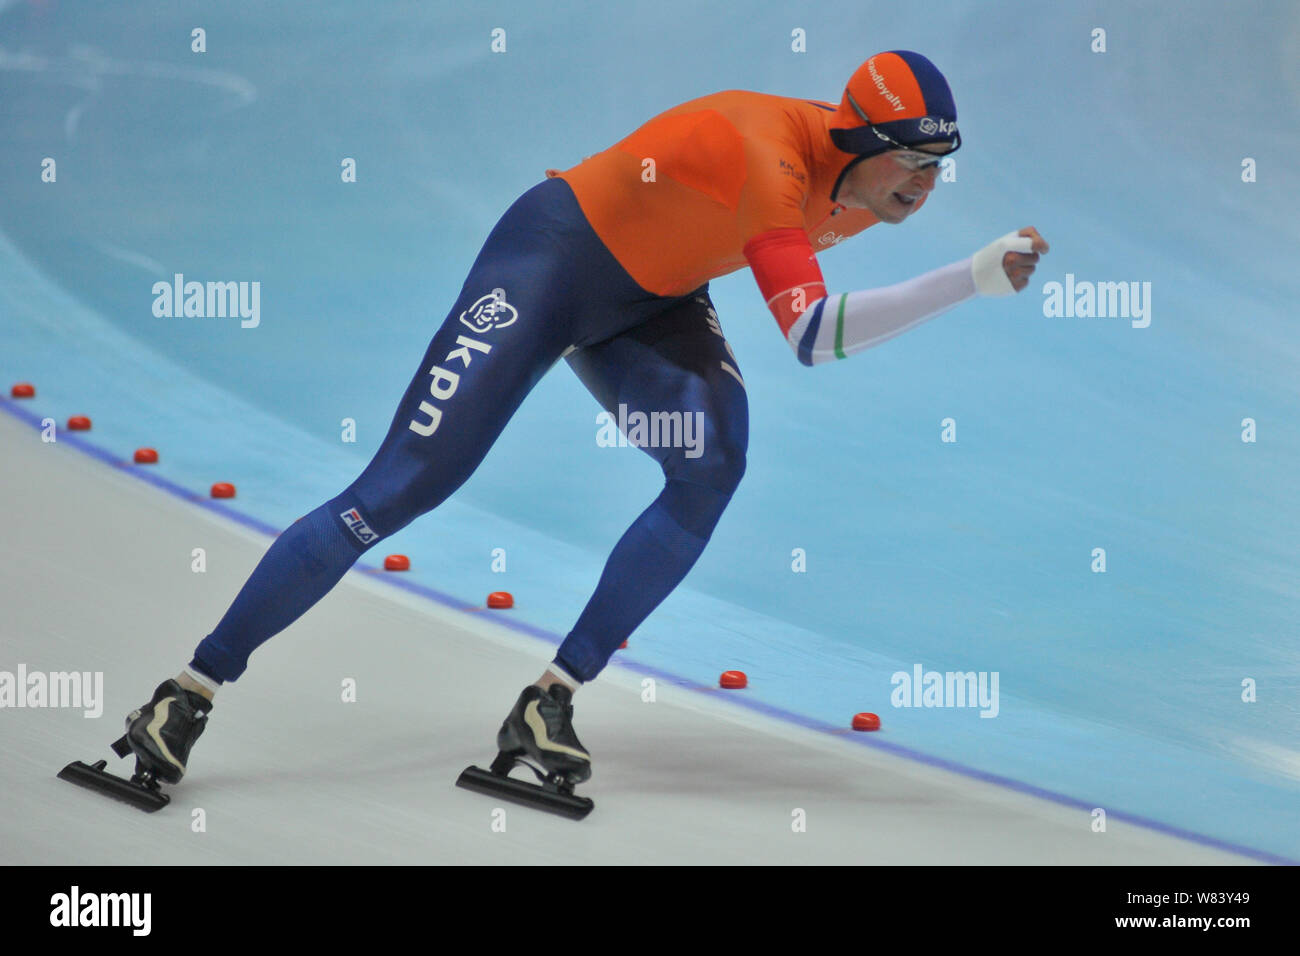 Dutch skater Sven Kramer competes during the men's 5000-meter Division A match of the ISU World Cup Speed Skating competition in Harbin city, northeas Stock Photo